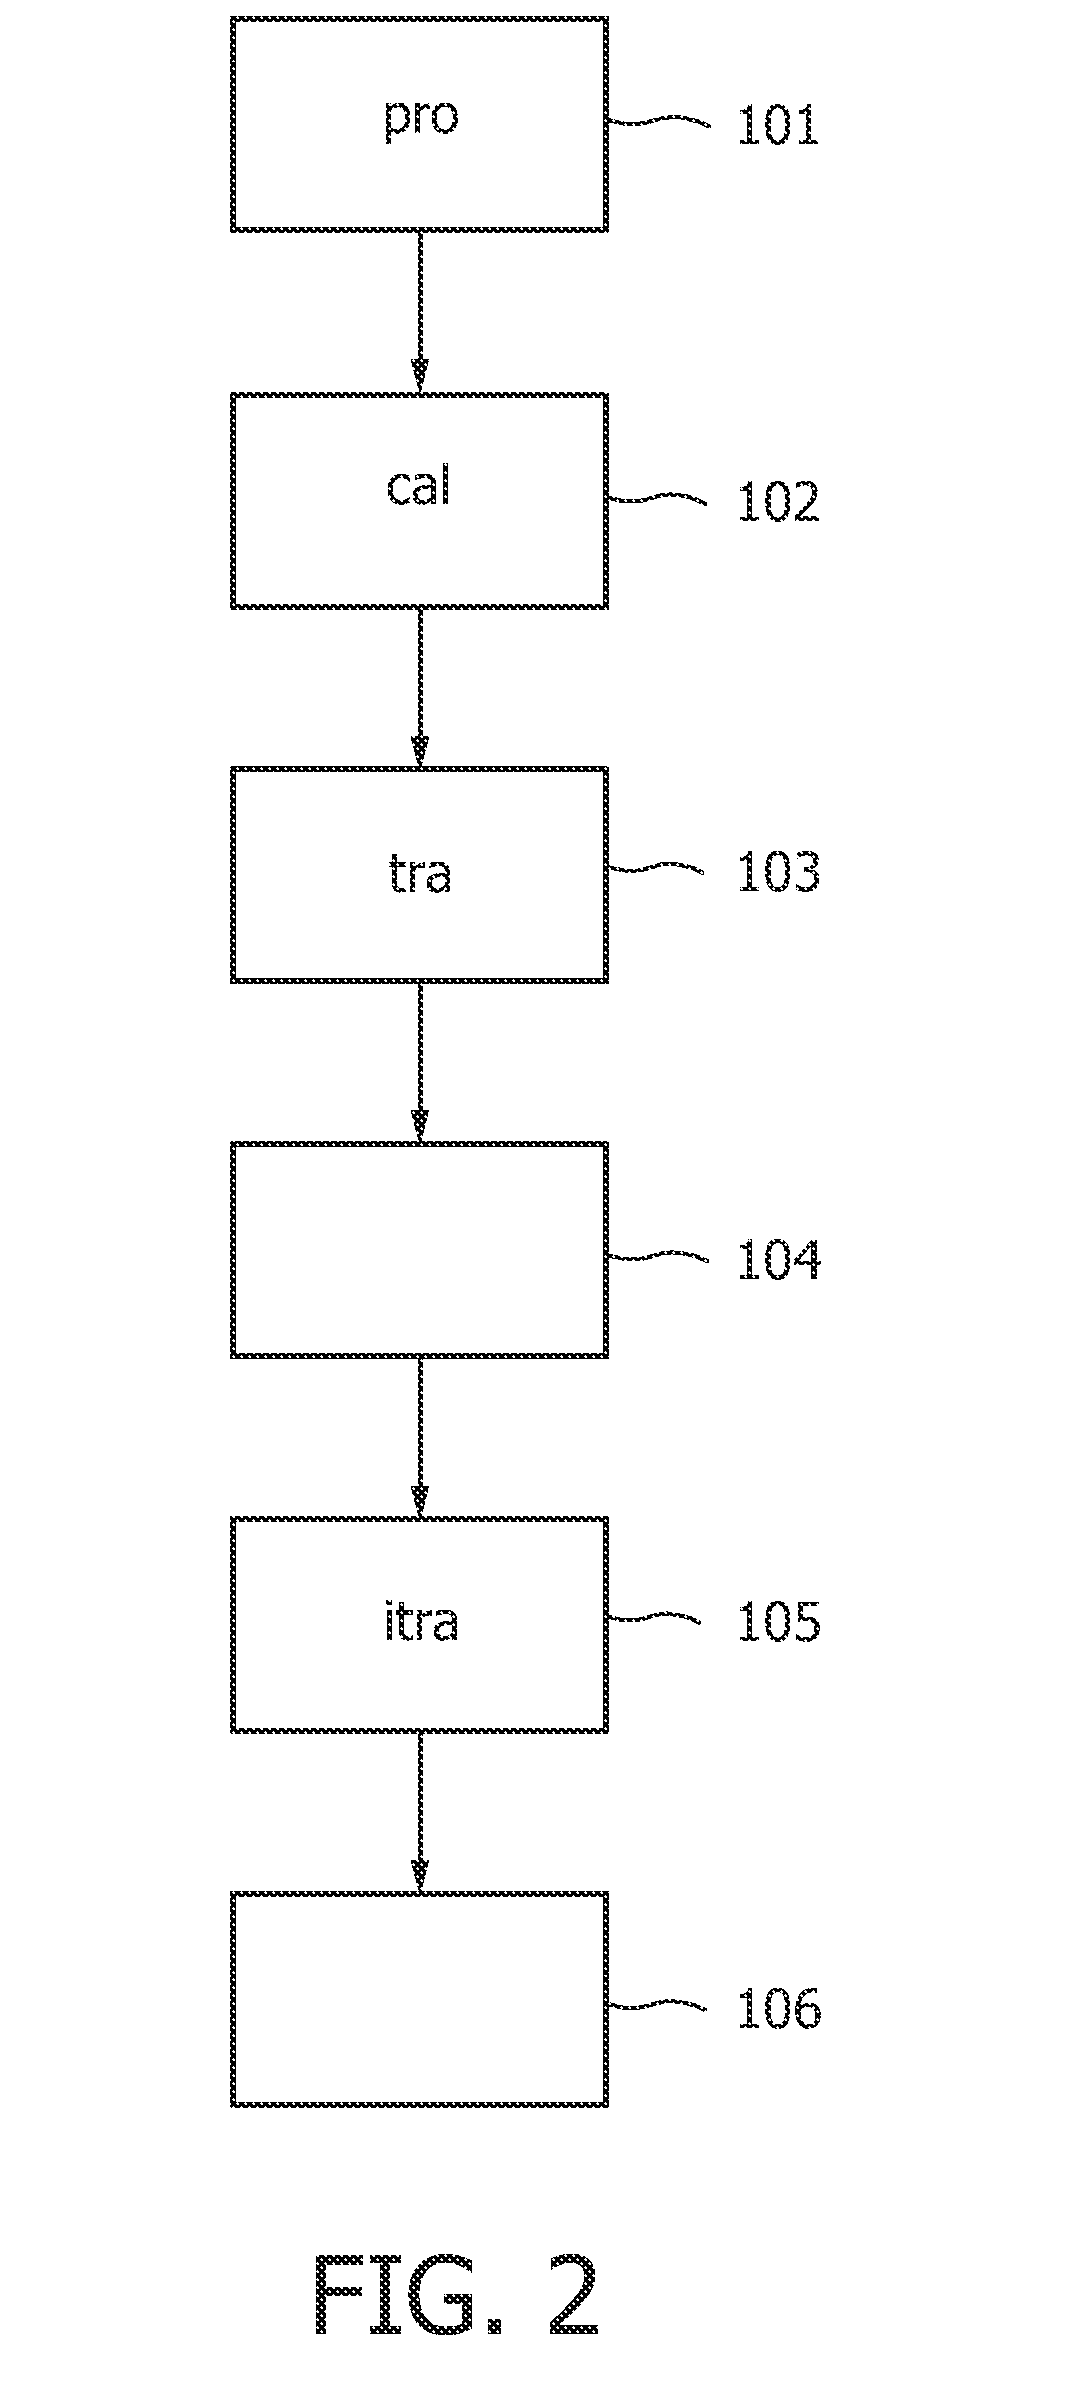 Projection system for producing attenuation components